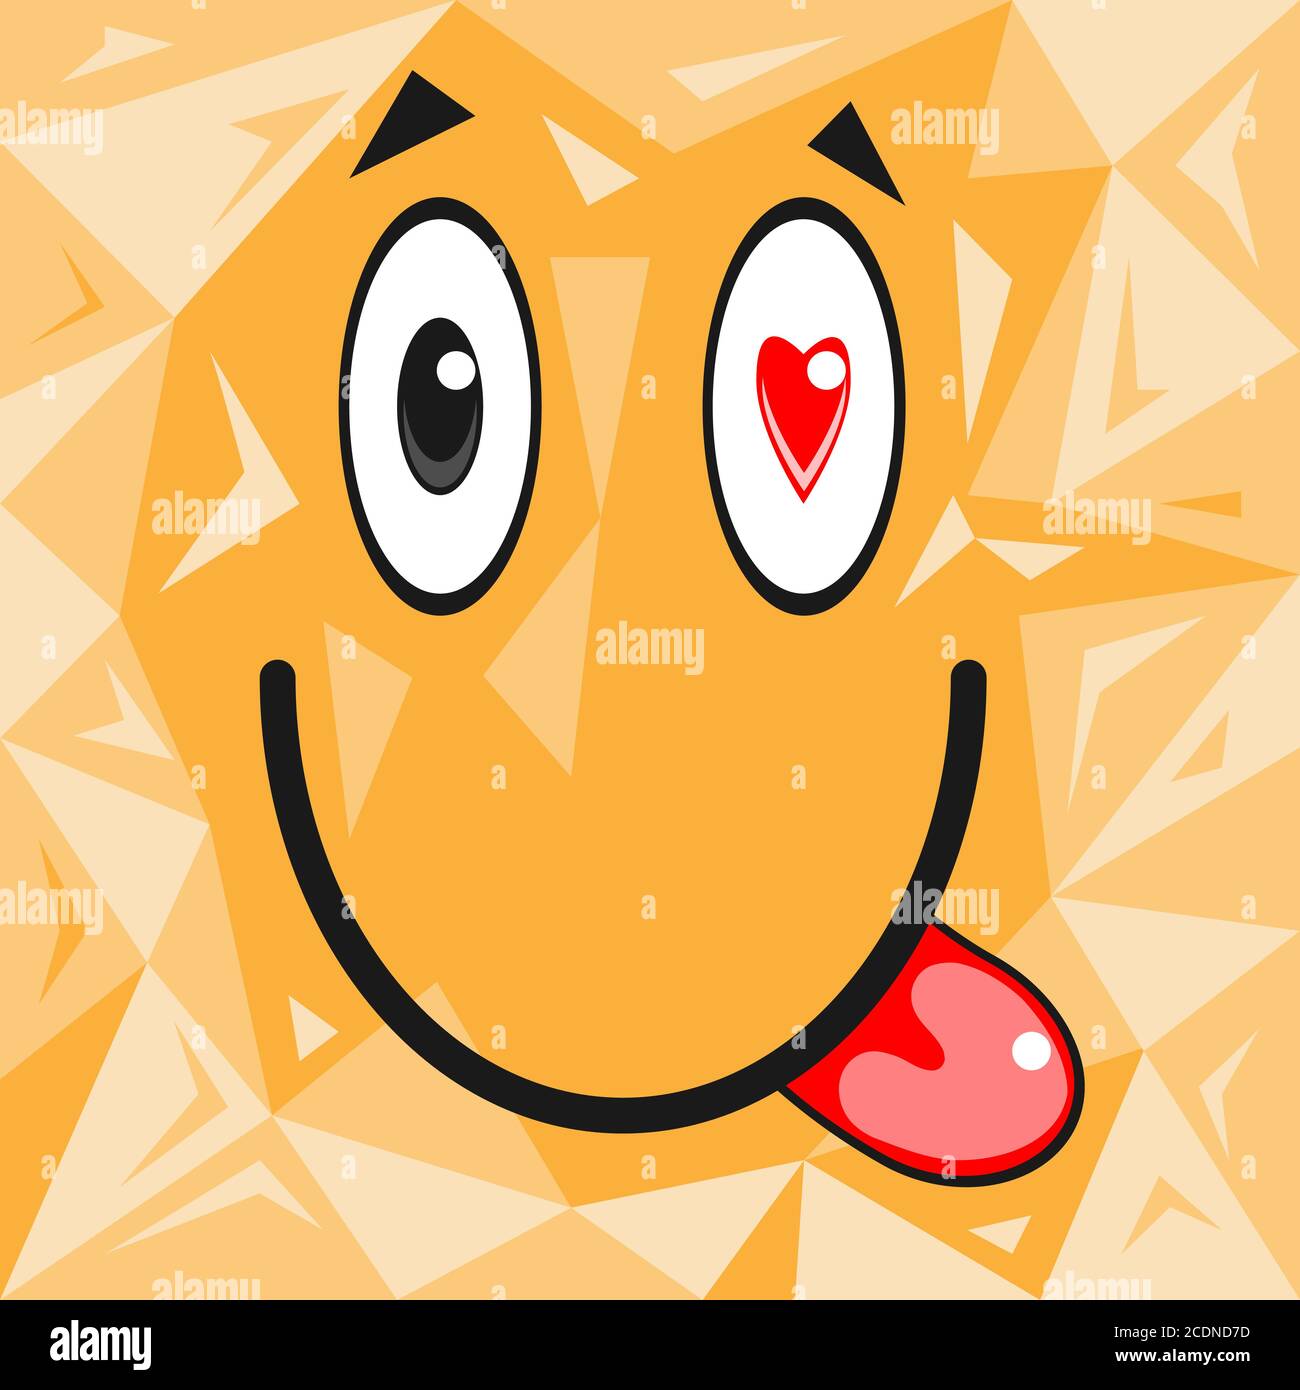 Cartoon face with eyes hearts and tongue vector illustration. Stock Vector